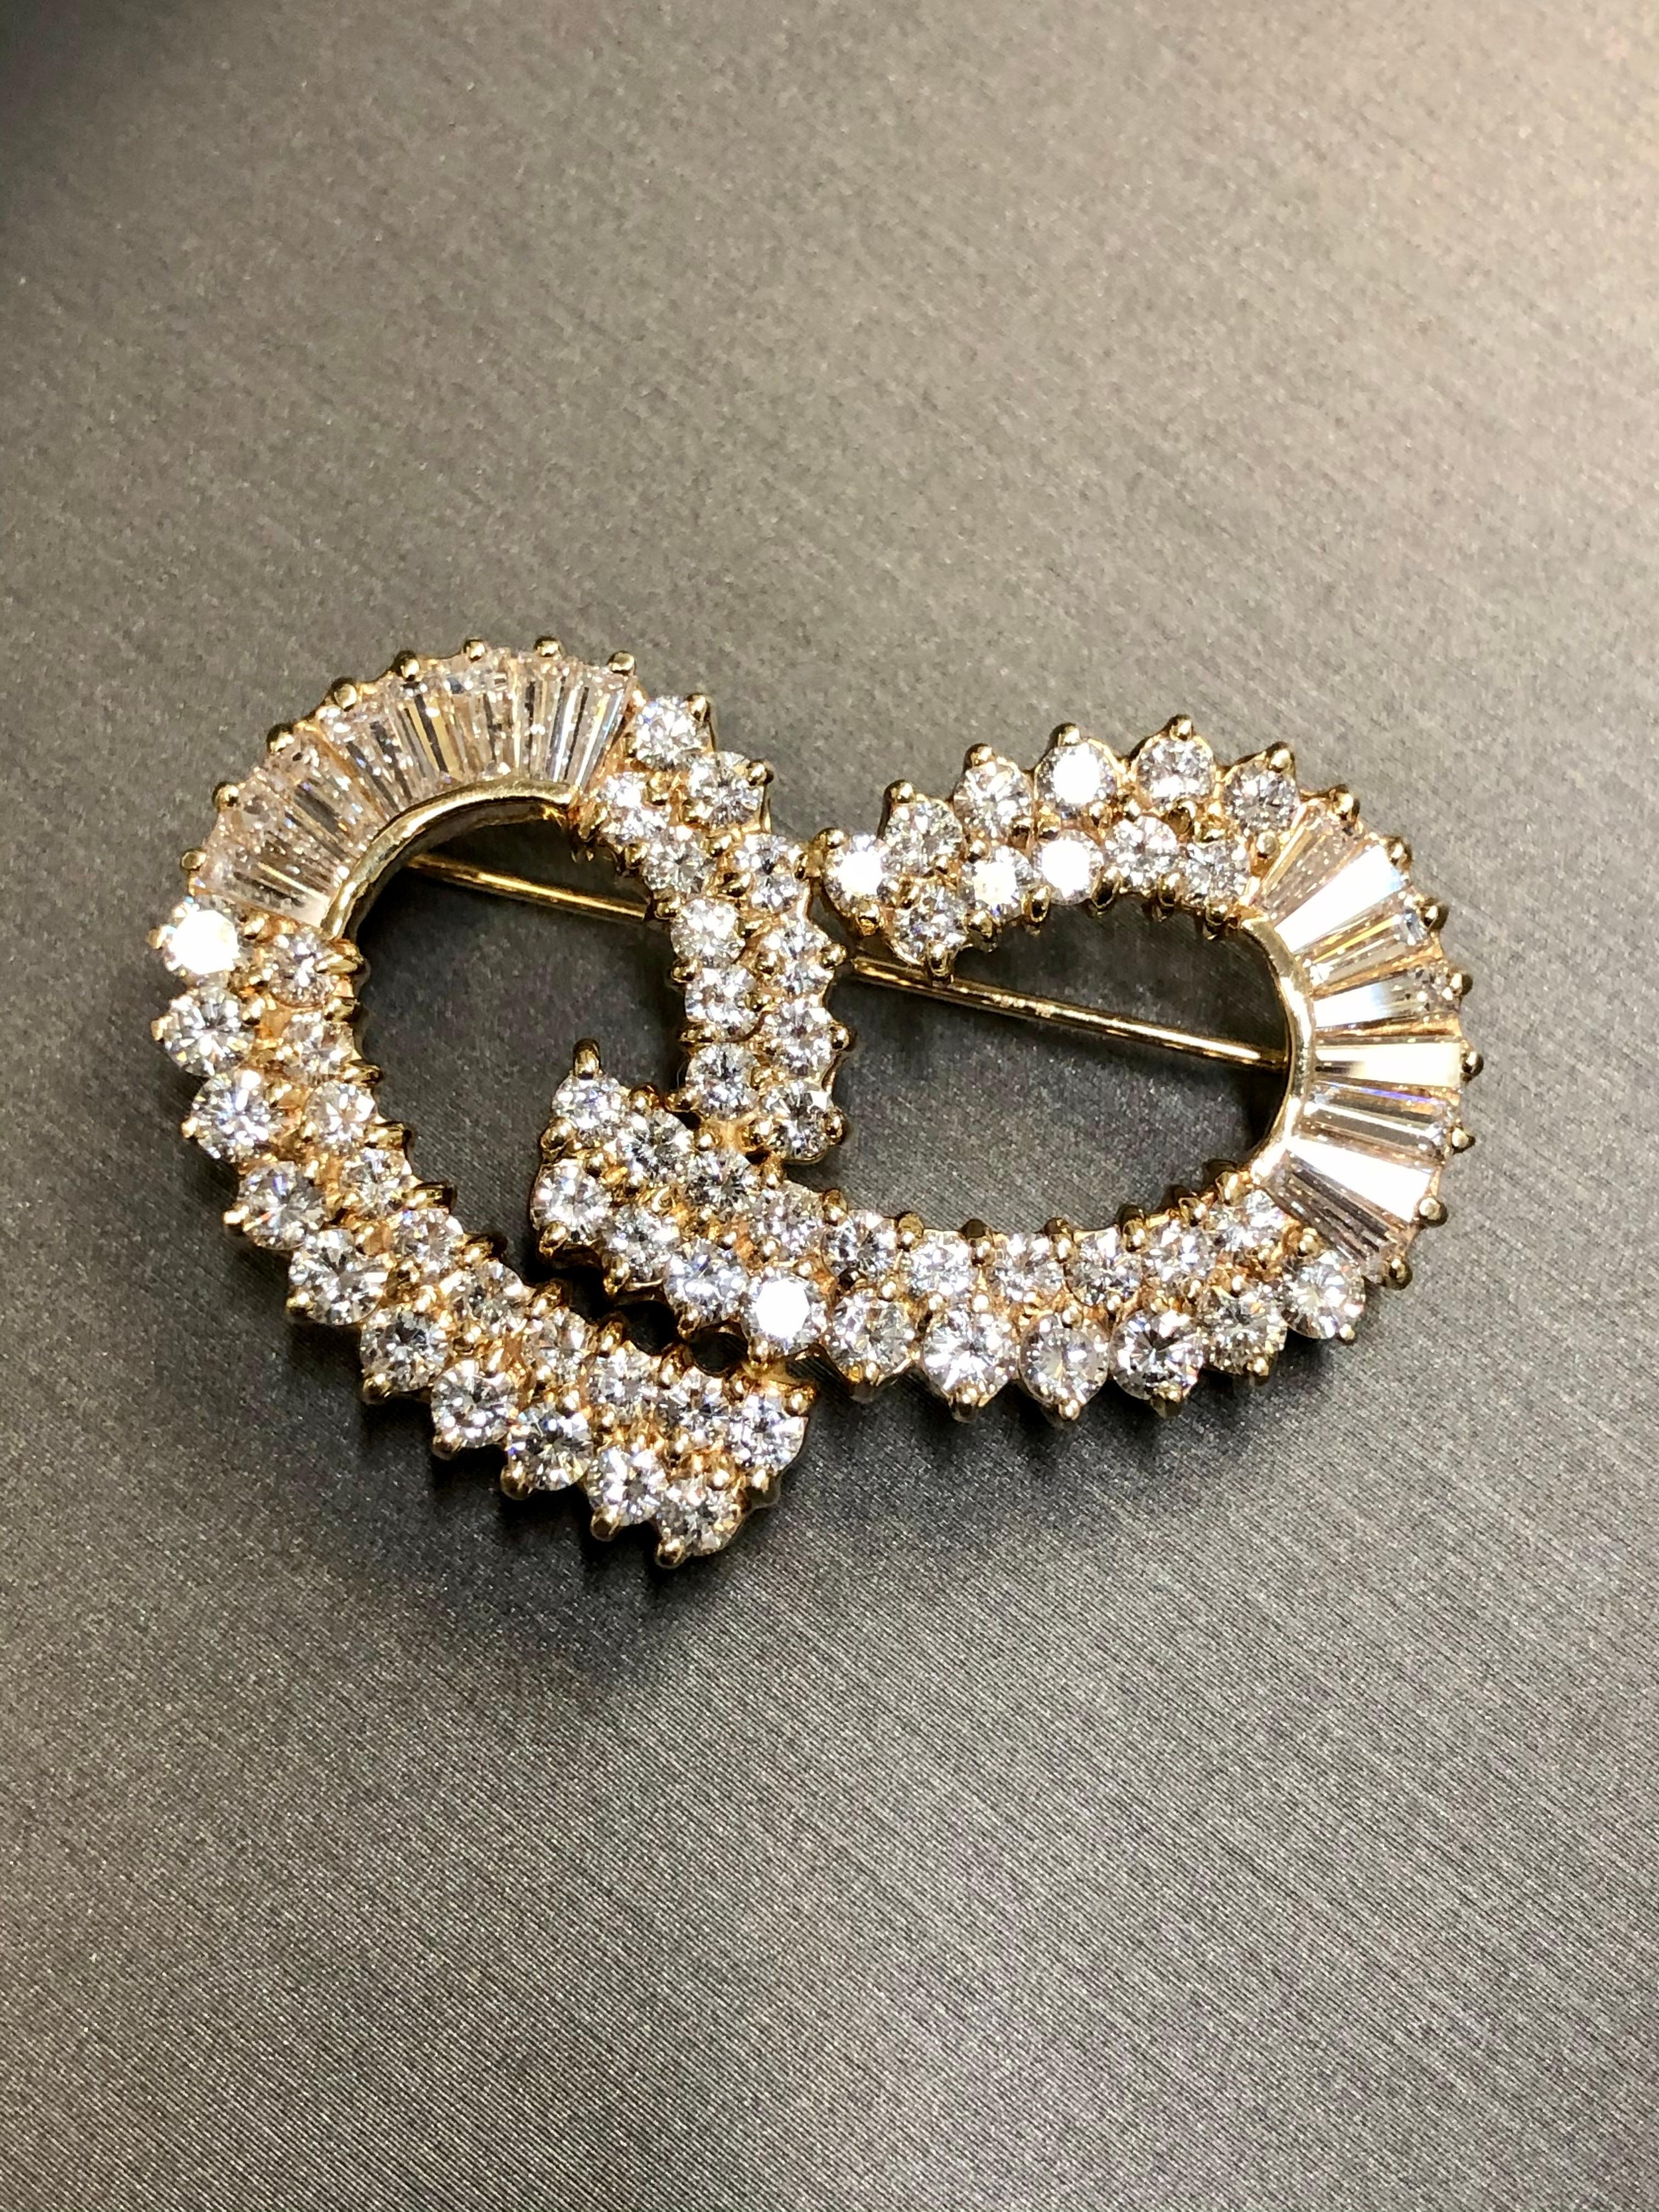 Estate 14k Swirl Ribbon Baguette Round Diamond Brooch Pin 6.40cttw G Vs1 In Excellent Condition For Sale In Winter Springs, FL